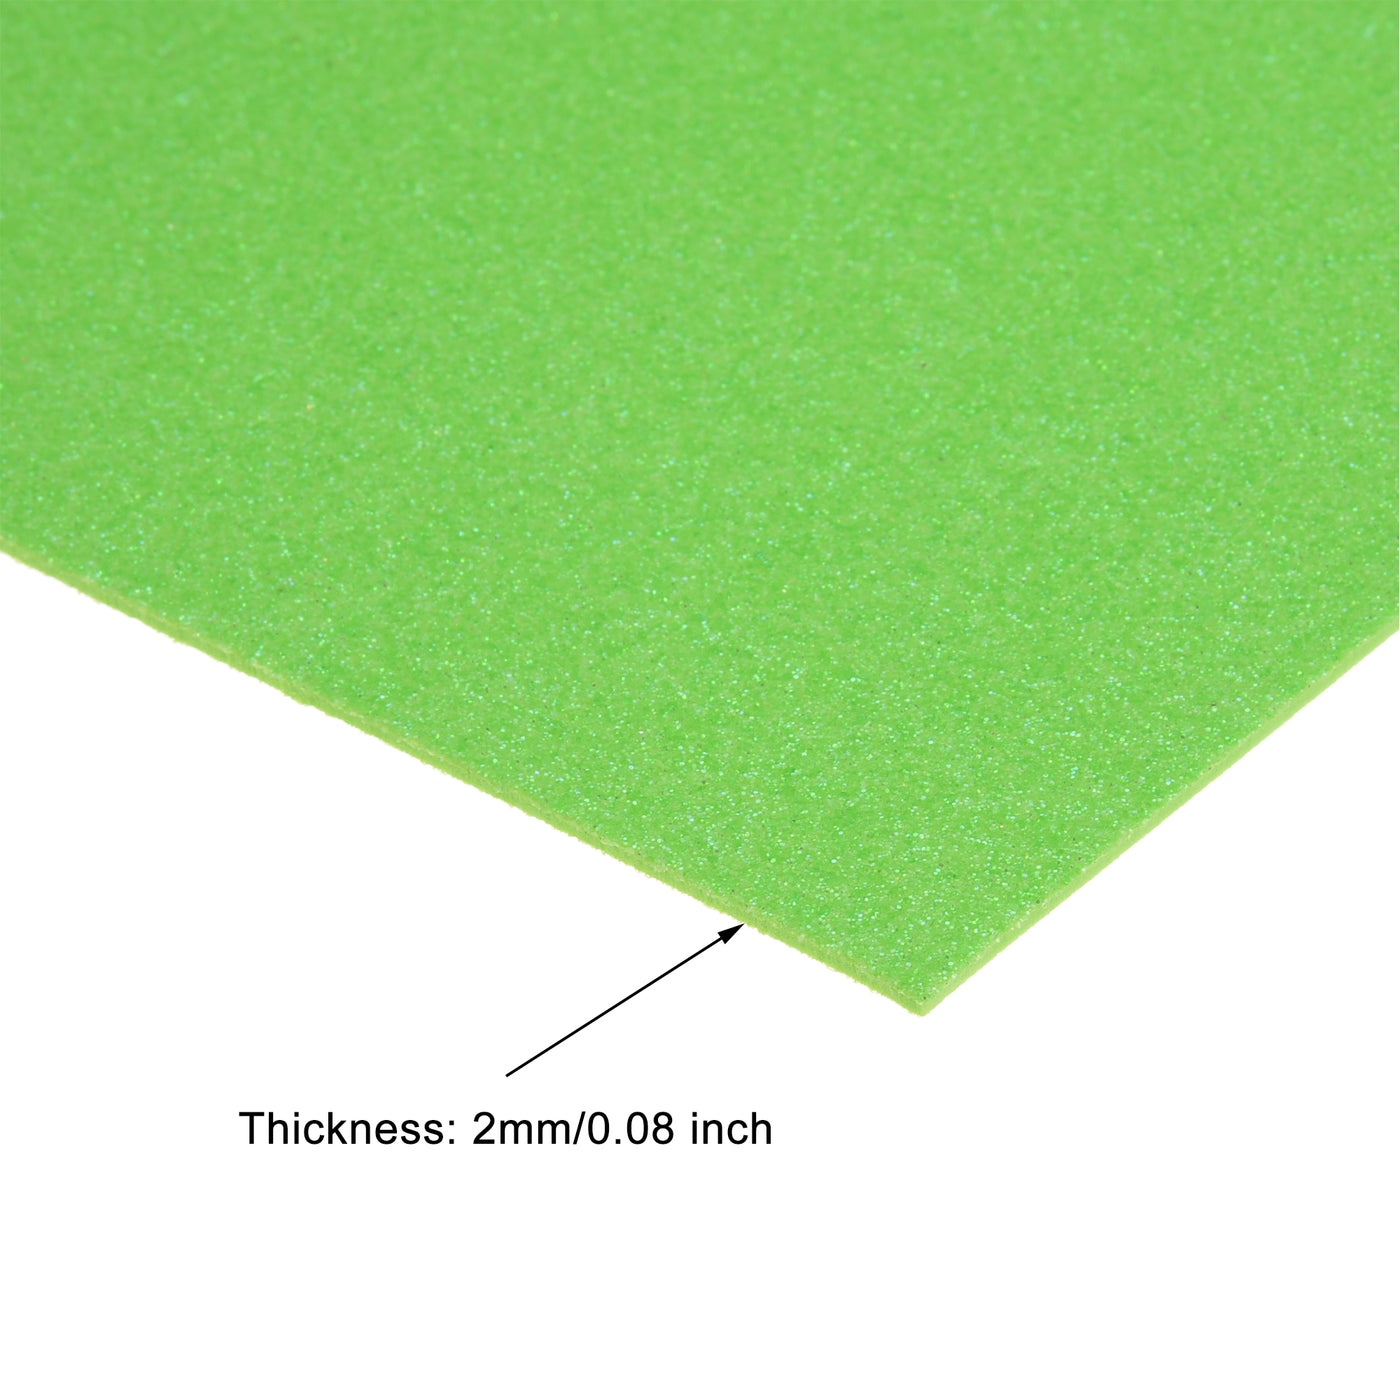 Uxcell Uxcell Purple Shiny EVA Foam Sheets 11 x 8 Inch 2mm Thick for Craft DIY 12 Pcs